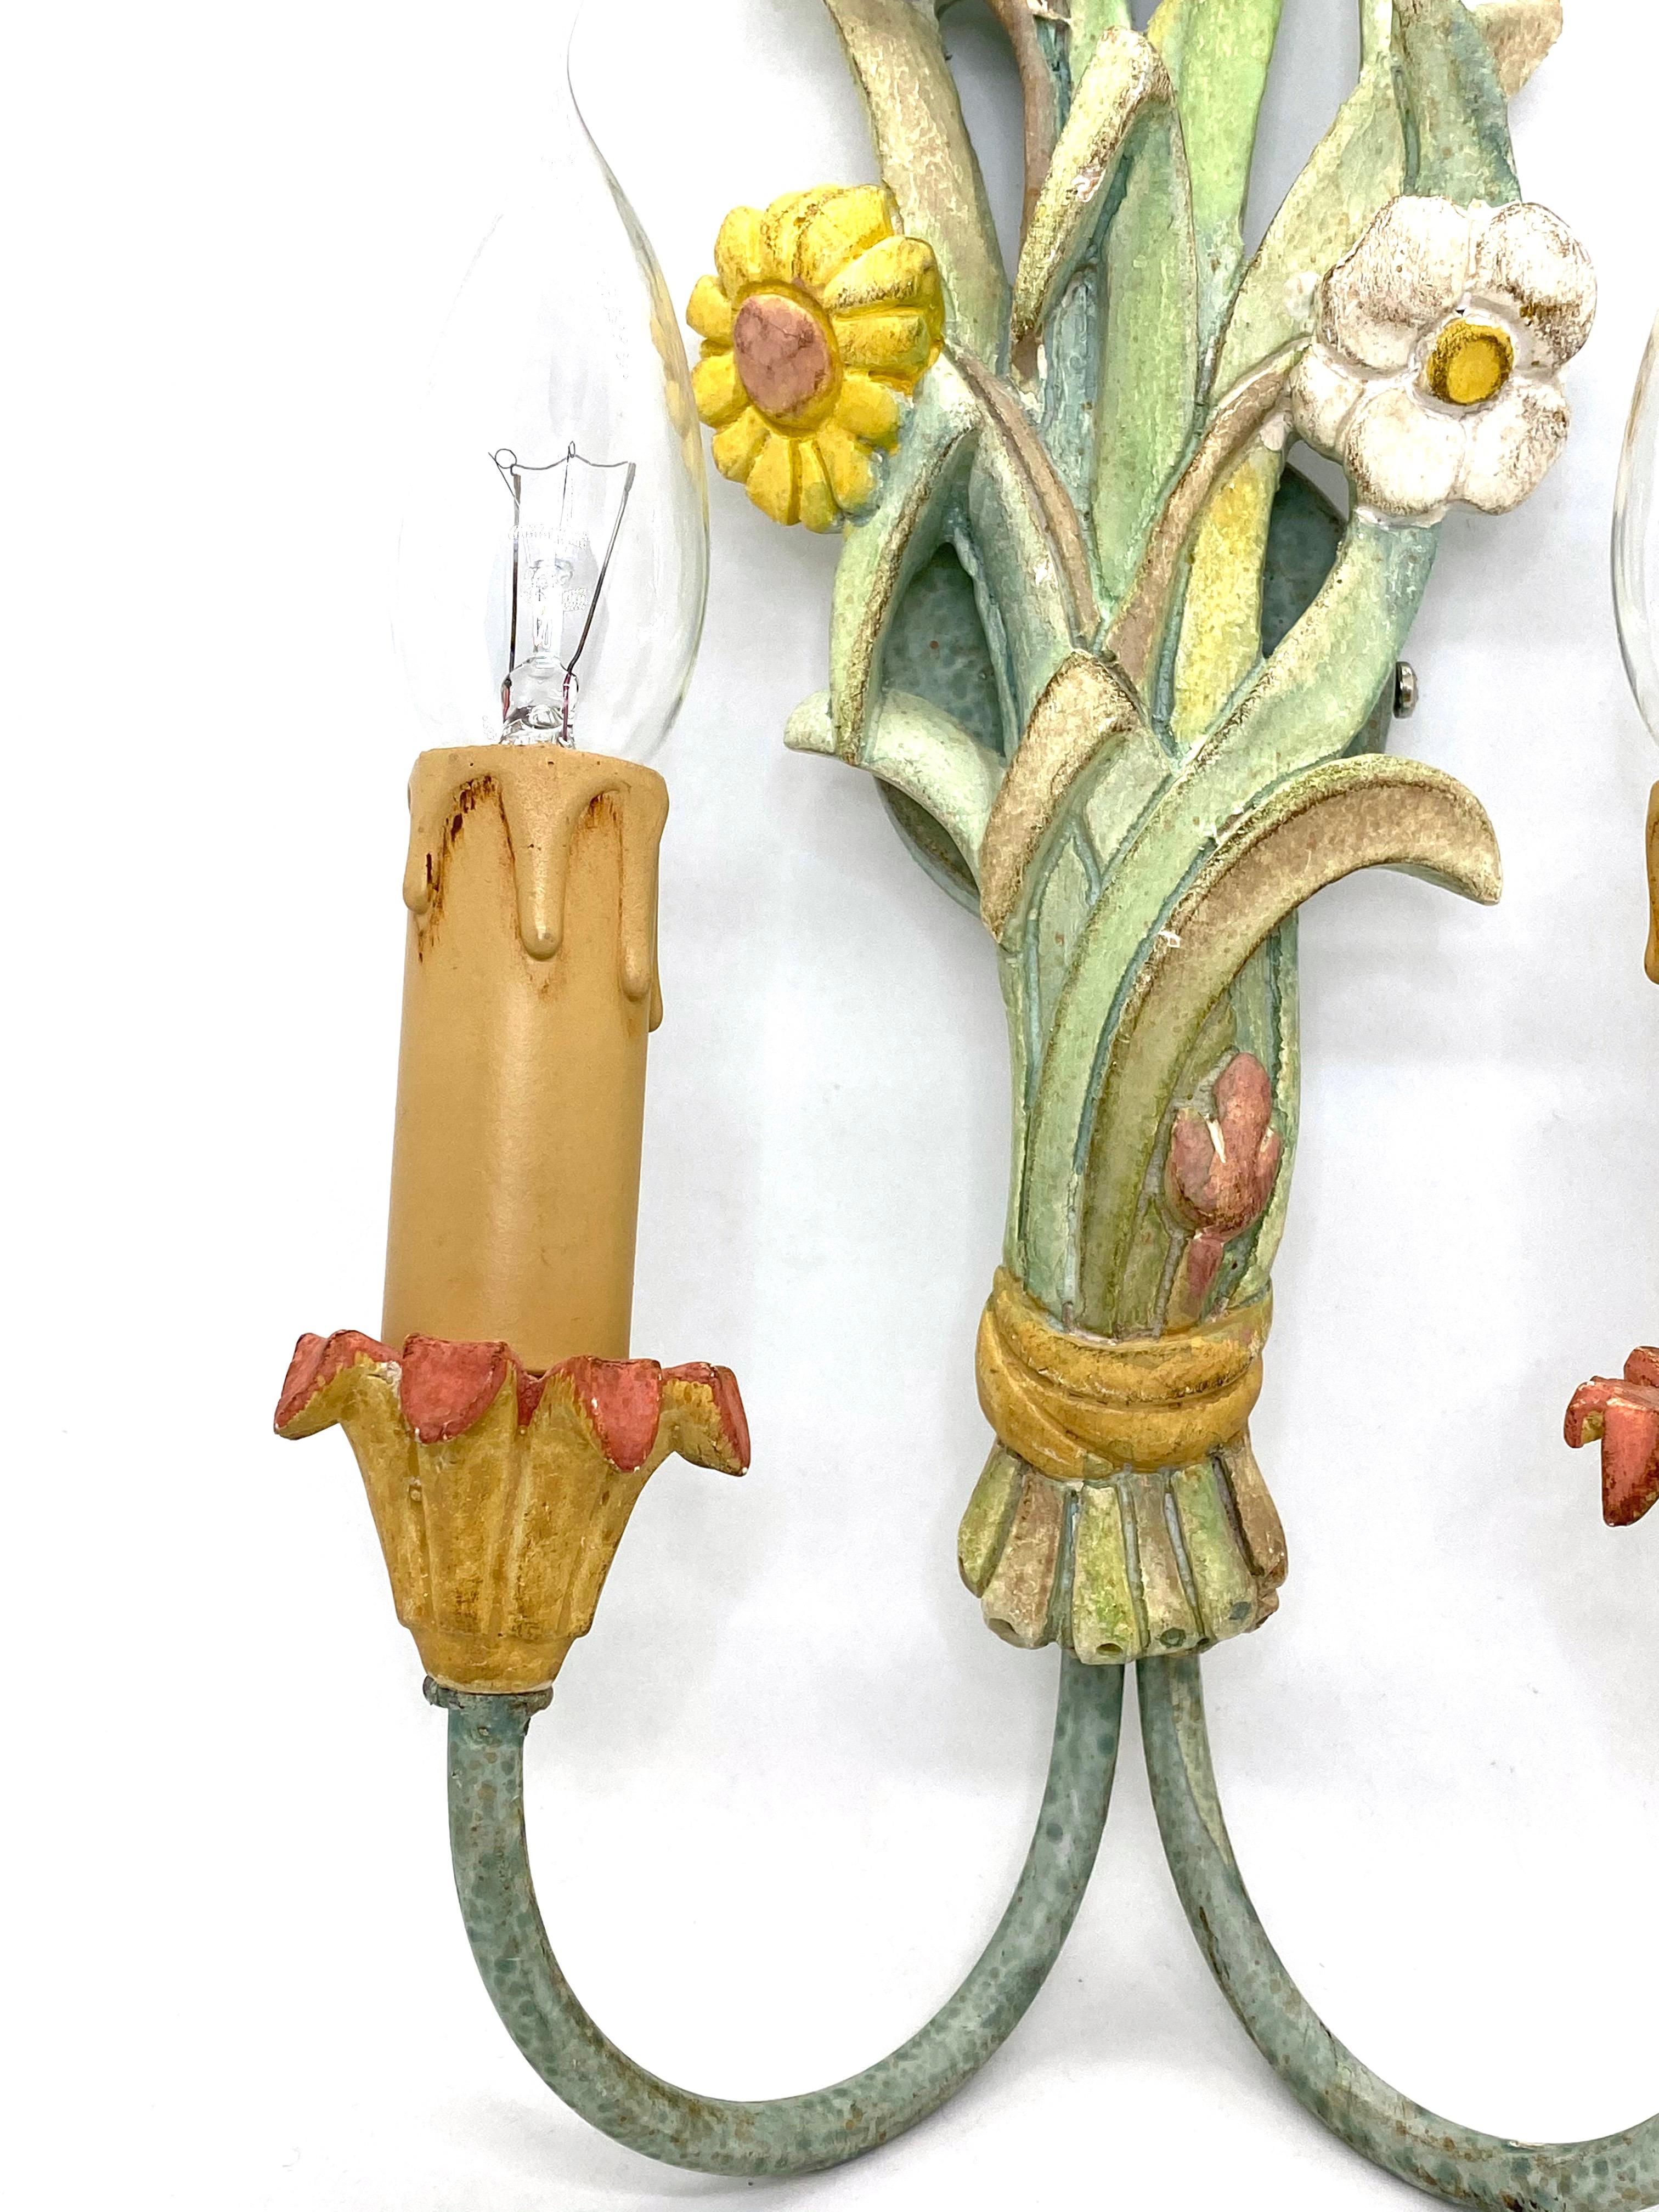 A single metal, stucco and wood floral sconce. The fixture requires two European E14 candelabra bulbs, each bulb up to 40 watts. The wall light has a beautiful color and gives each room an eclectic statement. Light bulbs are not included in this